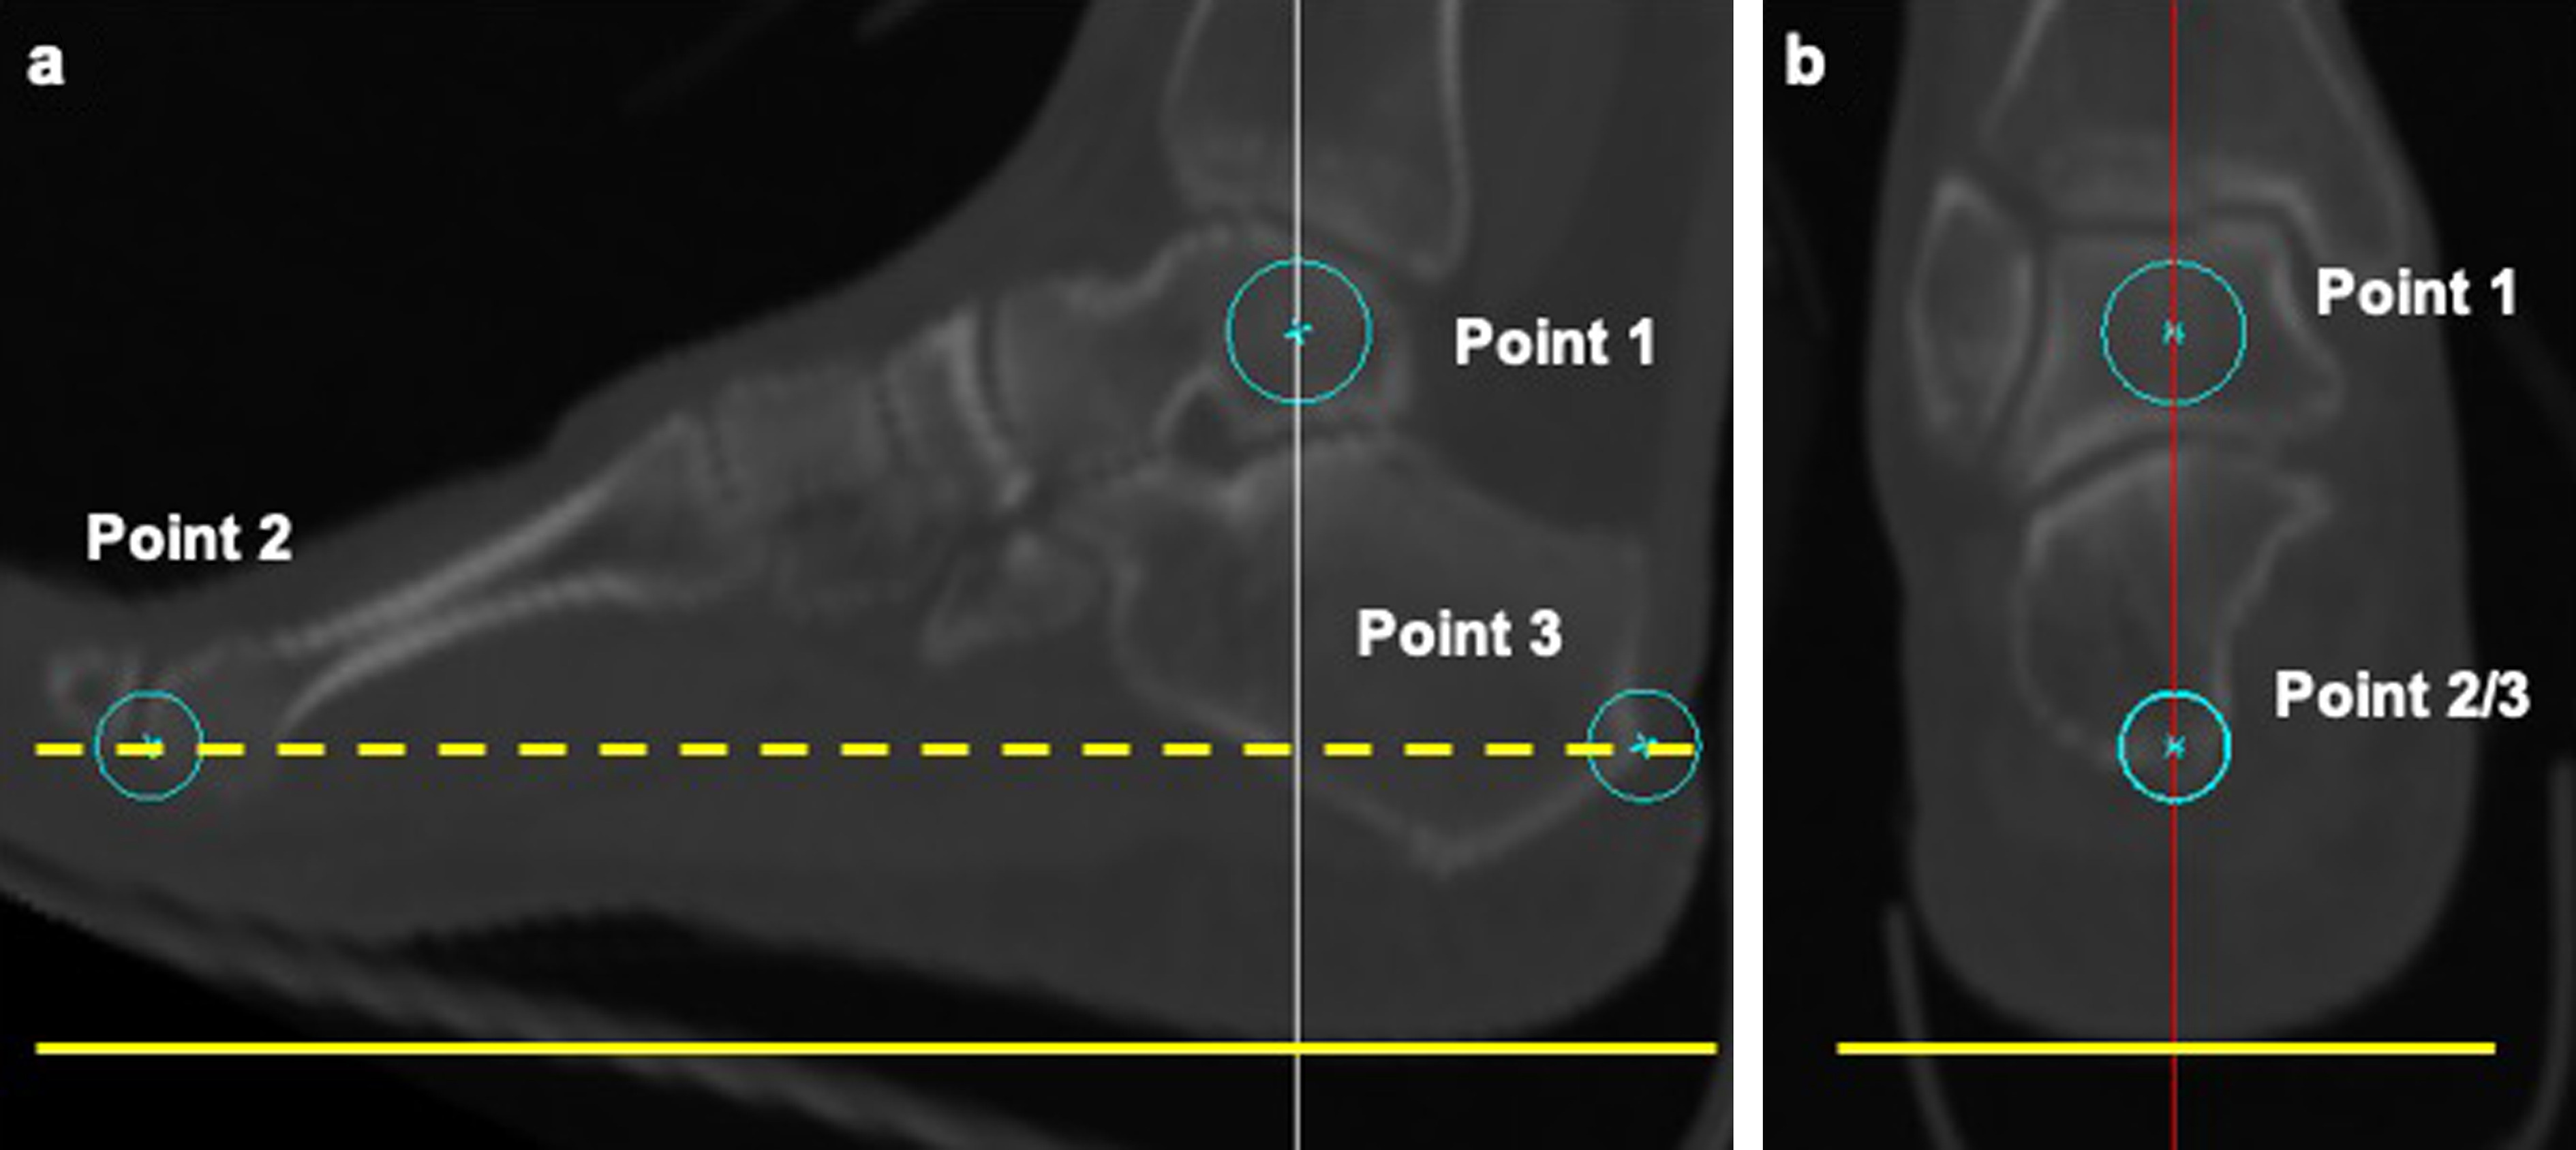 Fig. 3 
            a) Sagittal plane of the foot consisted of the centre of the talus (point 1), the most distal point of the head of the second metatarsal (point 2), and the most proximal point of the calcaneus (point 3). b) Plane perpendicular to the sagittal plane of the foot, including points 2 and 3, was defined as the plane parallel to the horizontal foot plane (yellow dotted line: plane 1). The plane parallel to plane 1 to the lowest point of the plantar surface of the heel was defined as the axial plane of the foot (yellow straight line).
          